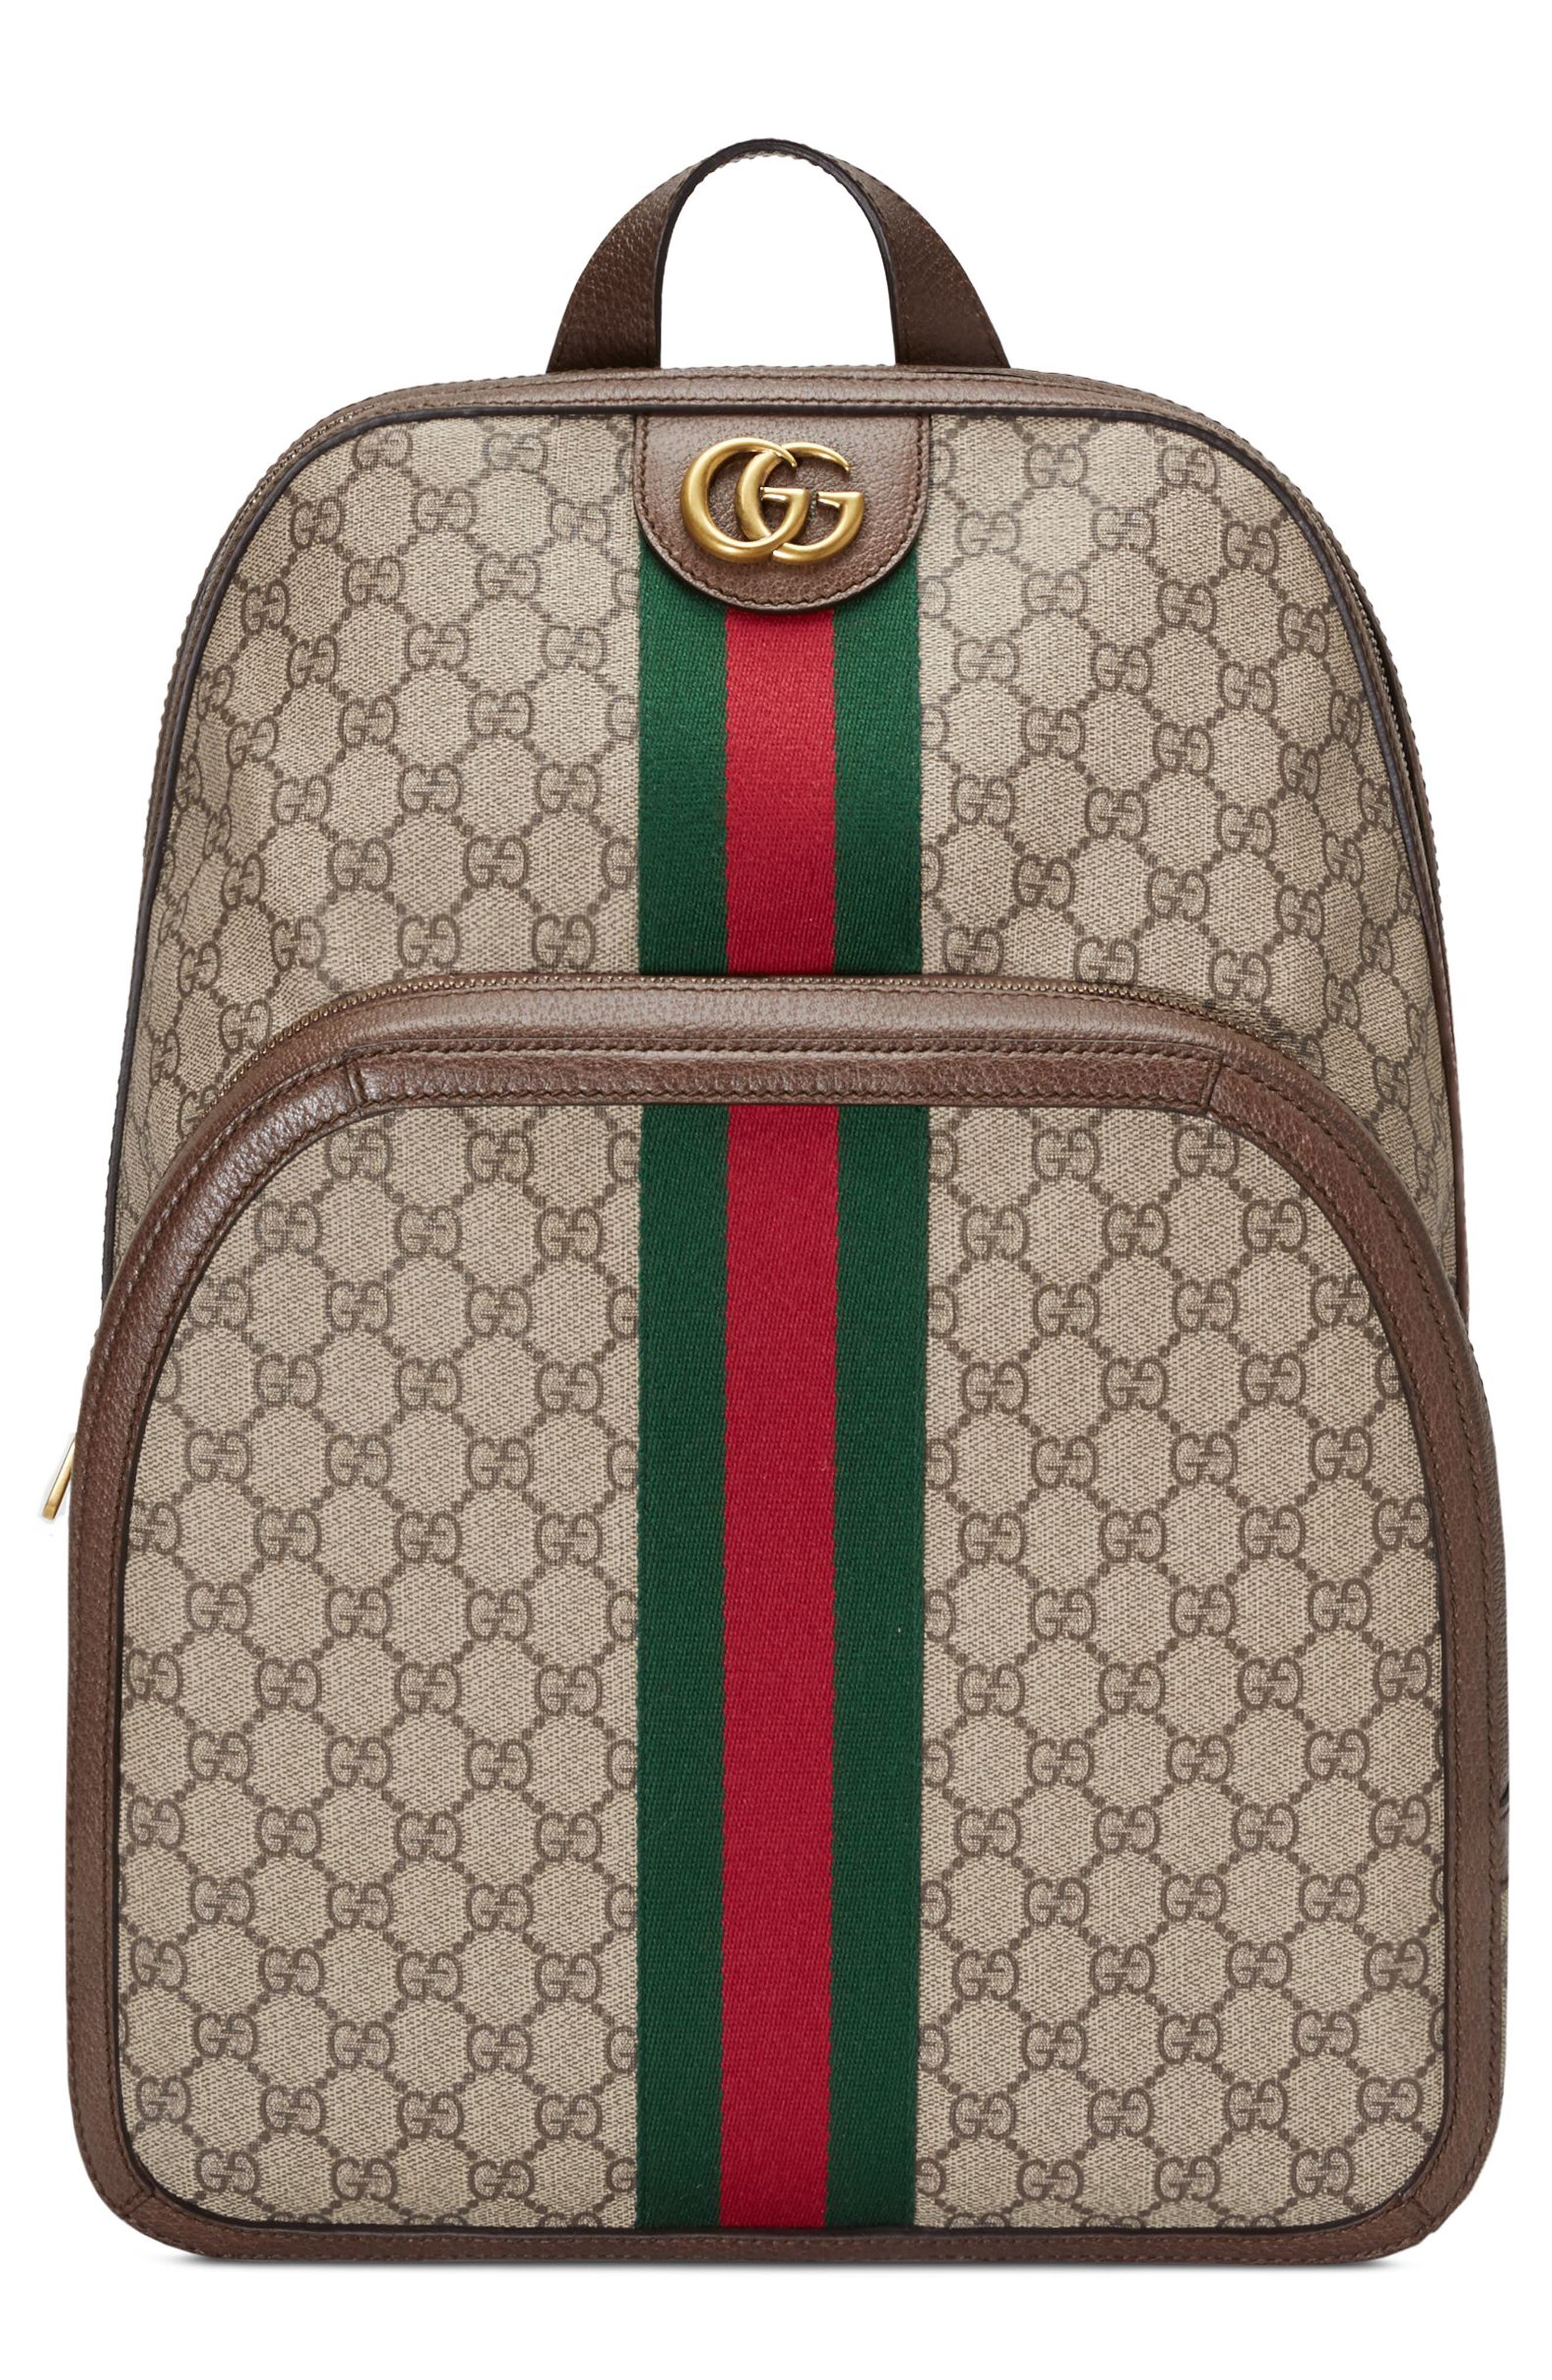 gucci women's backpack purse